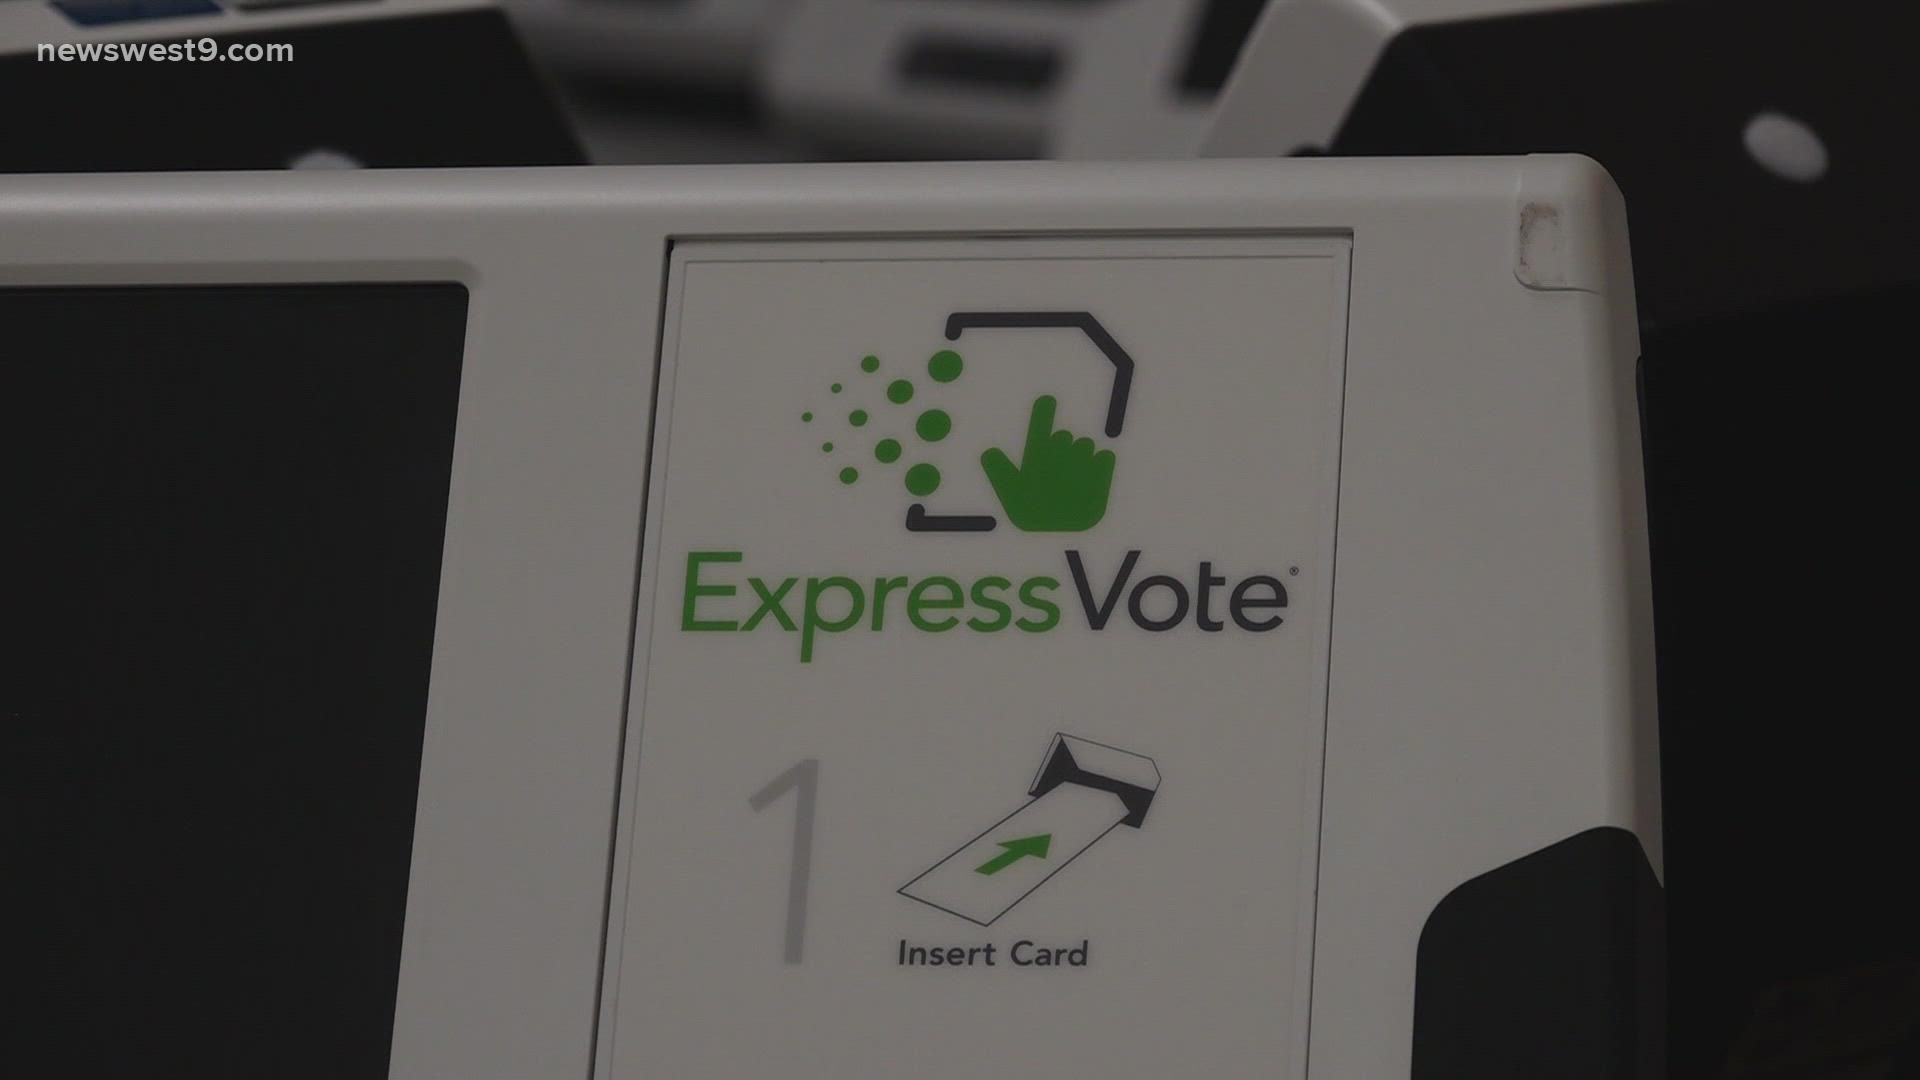 Carolyn Graves, the Midland County Elections Administrator, said some of the new changes were necessary by law, but some were implemented by the elections office.